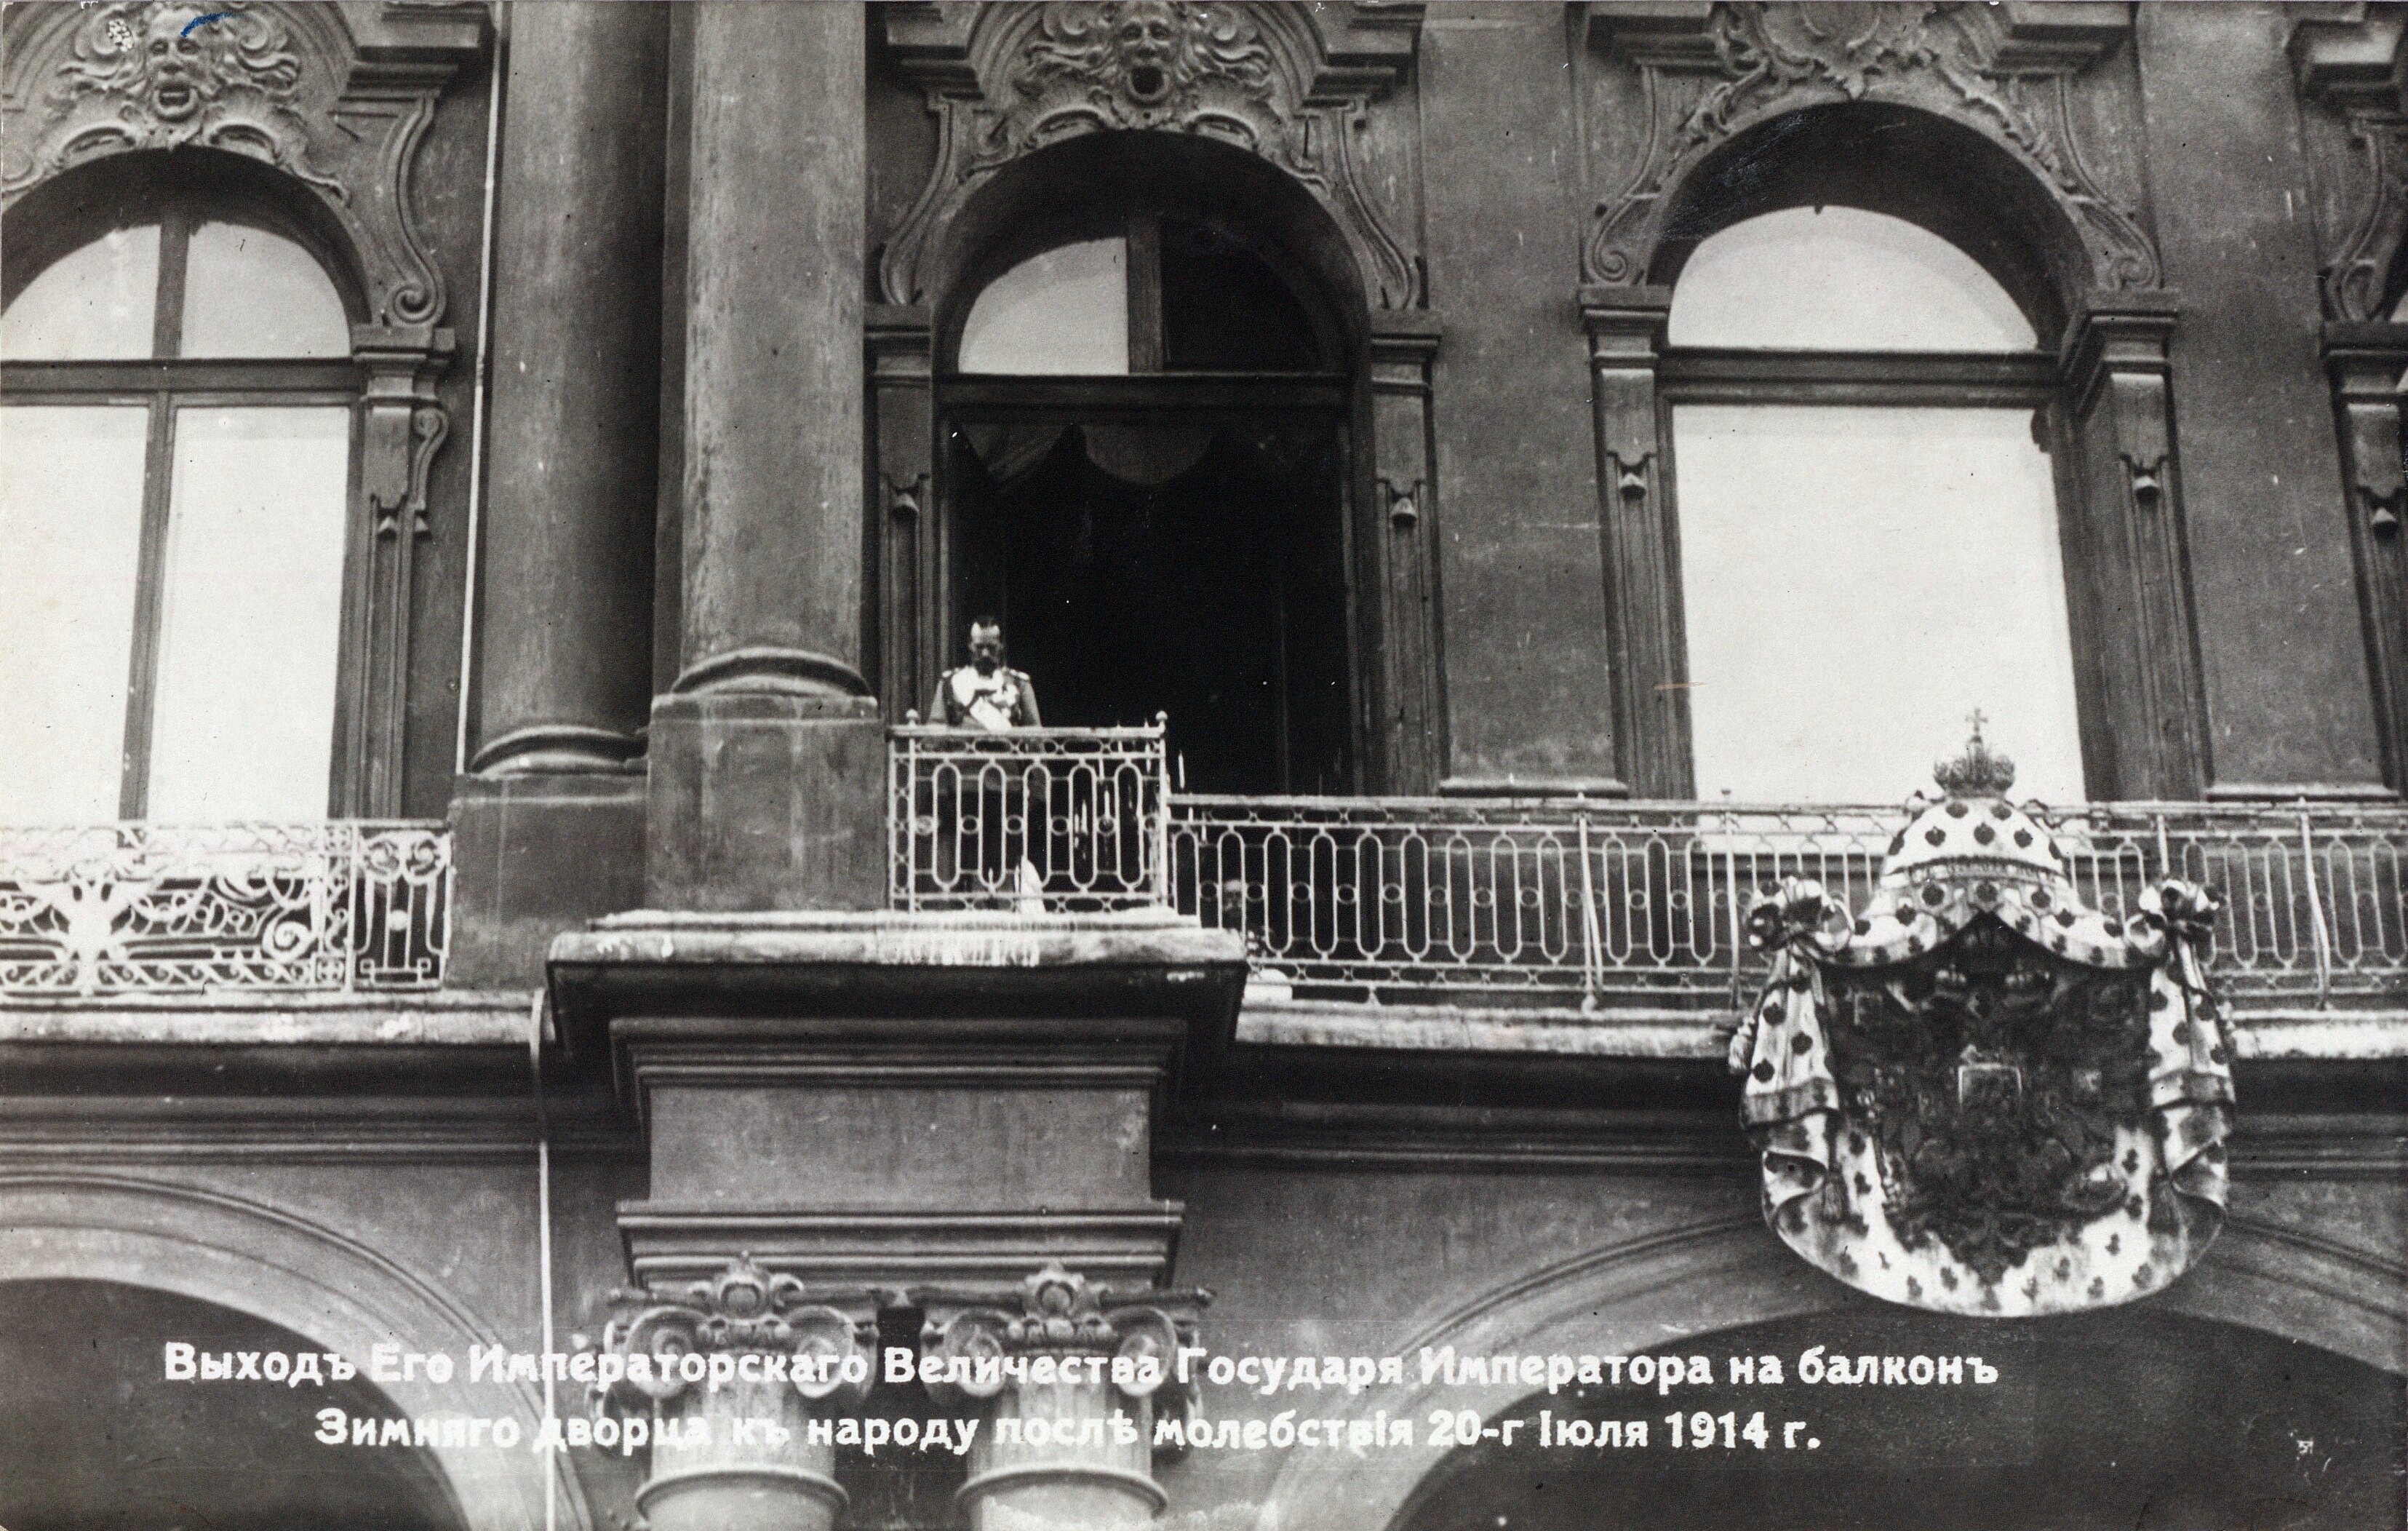 Nicholas II Declares War on Germany from the balcony of the Winter Palace.